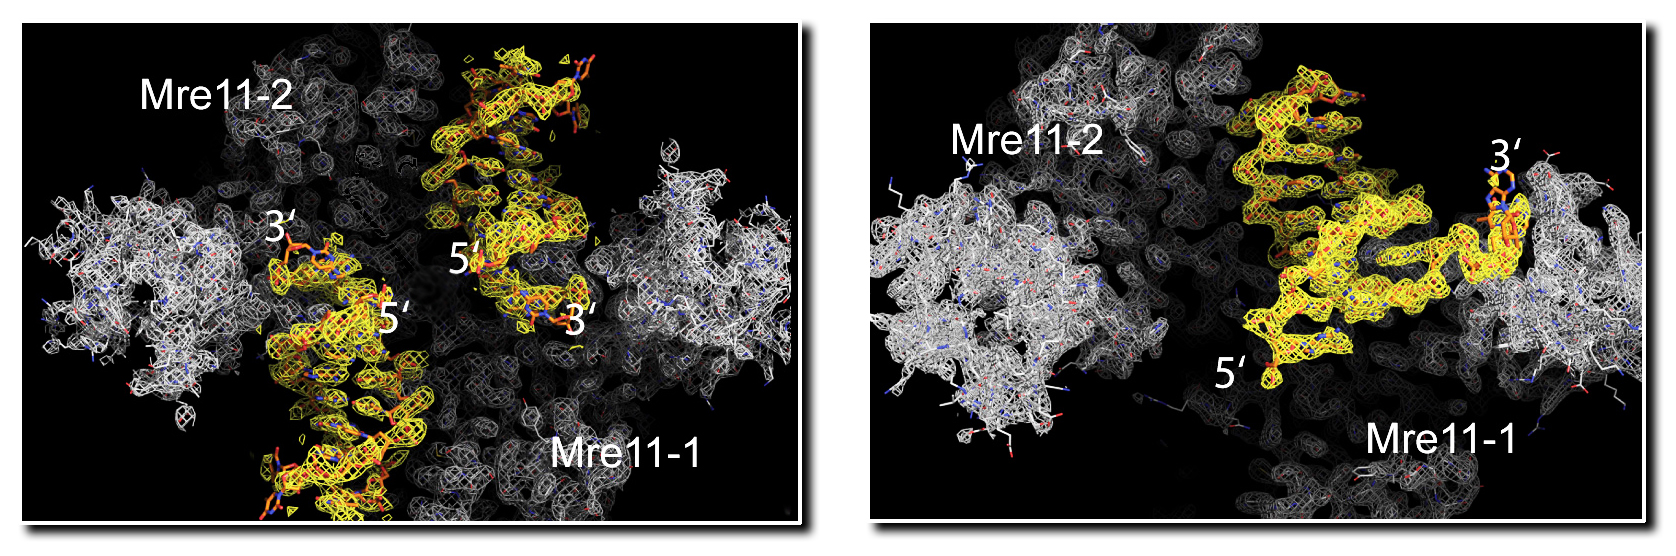 Mre11 proteins initiate the repair of double-strand breaks in DNA, either on two ends of broken DNA brought together (synaptic complex at left) or at the site of a collapsed fork in replicating DNA (branching complex at right). The detailed structural information in these models was mostly obtained from protein crystallography of Mre11 dimers bound to DNA.